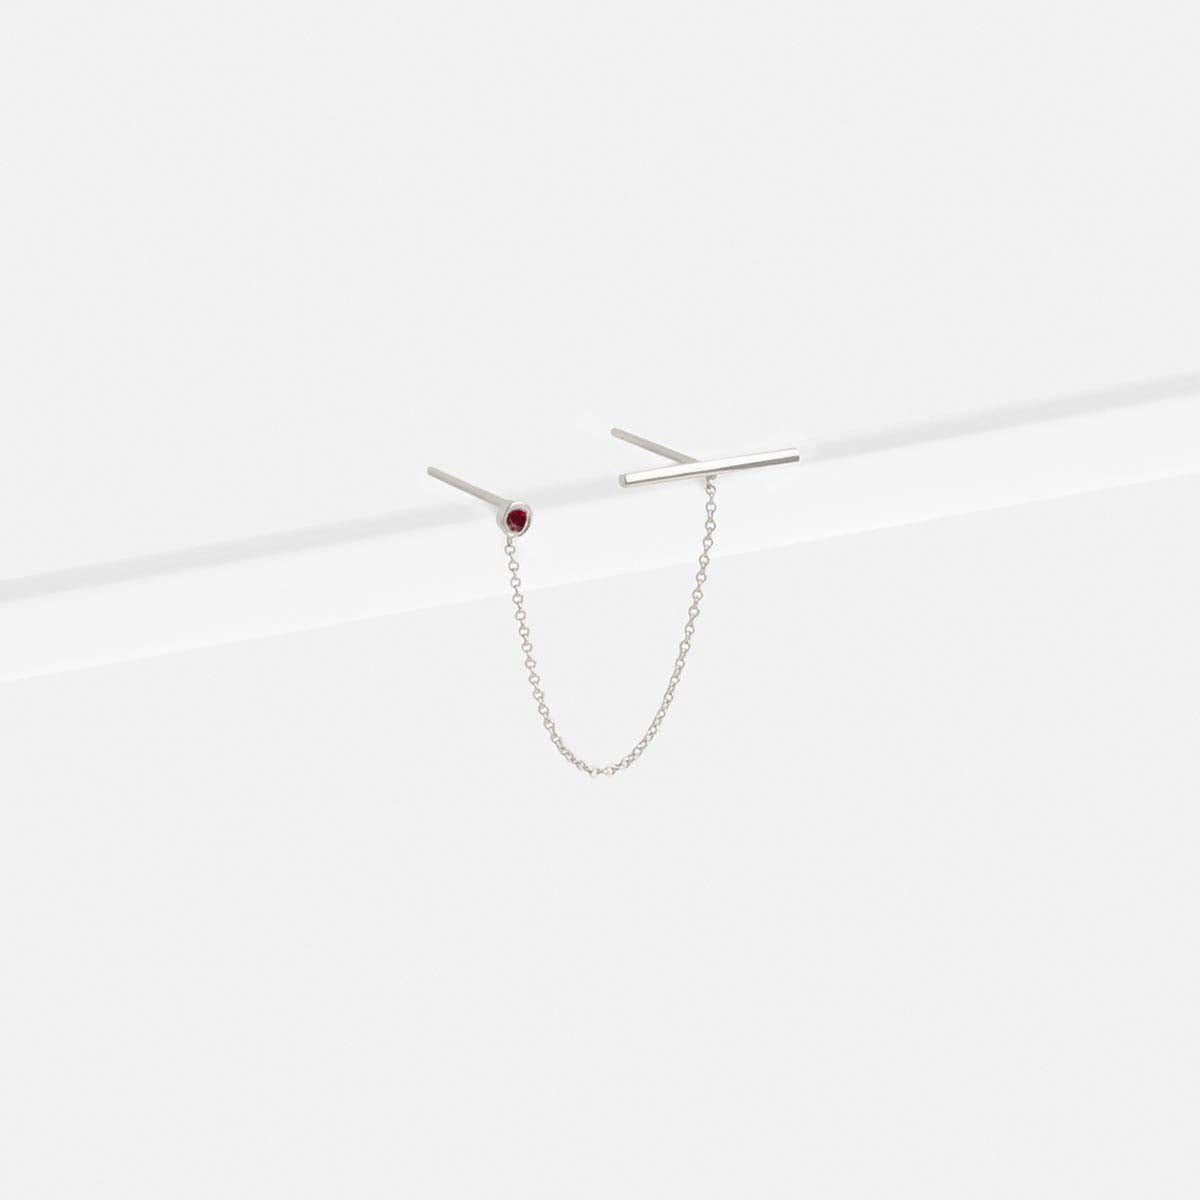 Nusu Minimal Double Piercing Earring in 14k White Gold set with Ruby By SHW Fine Jewelry NYC